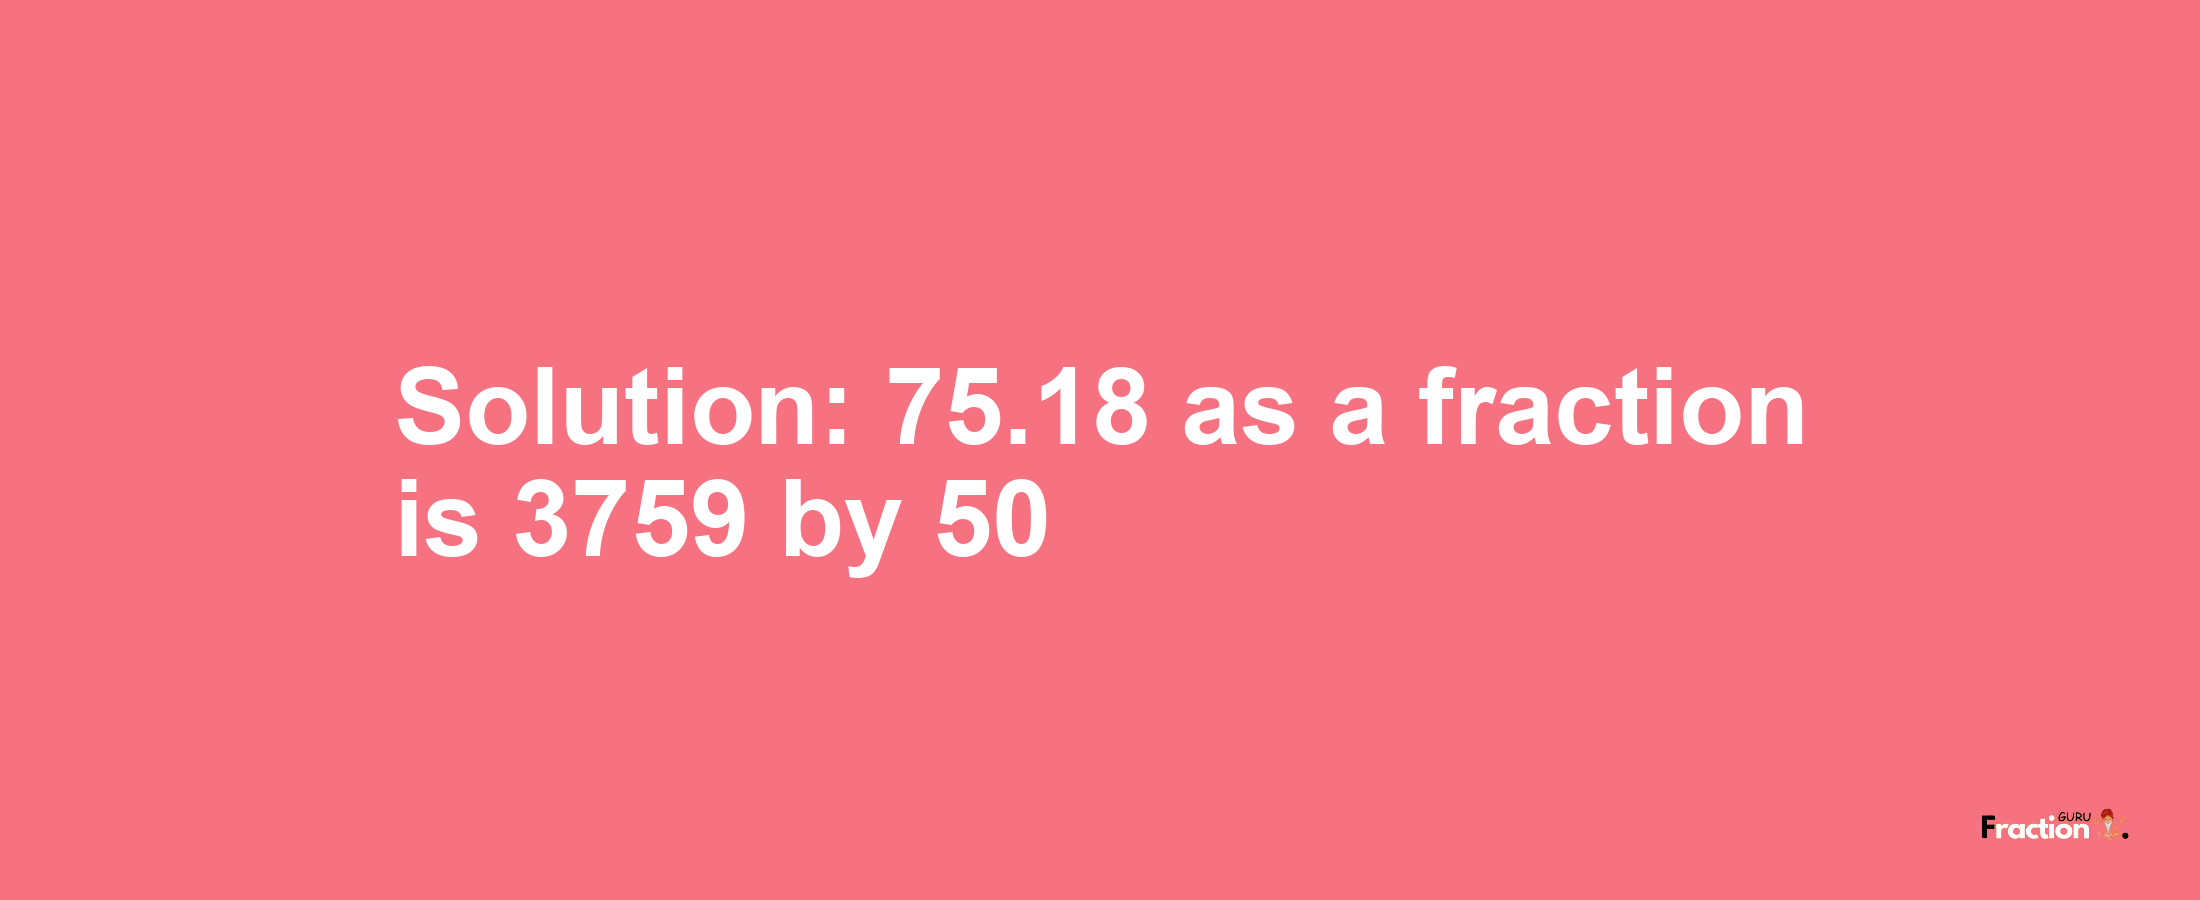 Solution:75.18 as a fraction is 3759/50